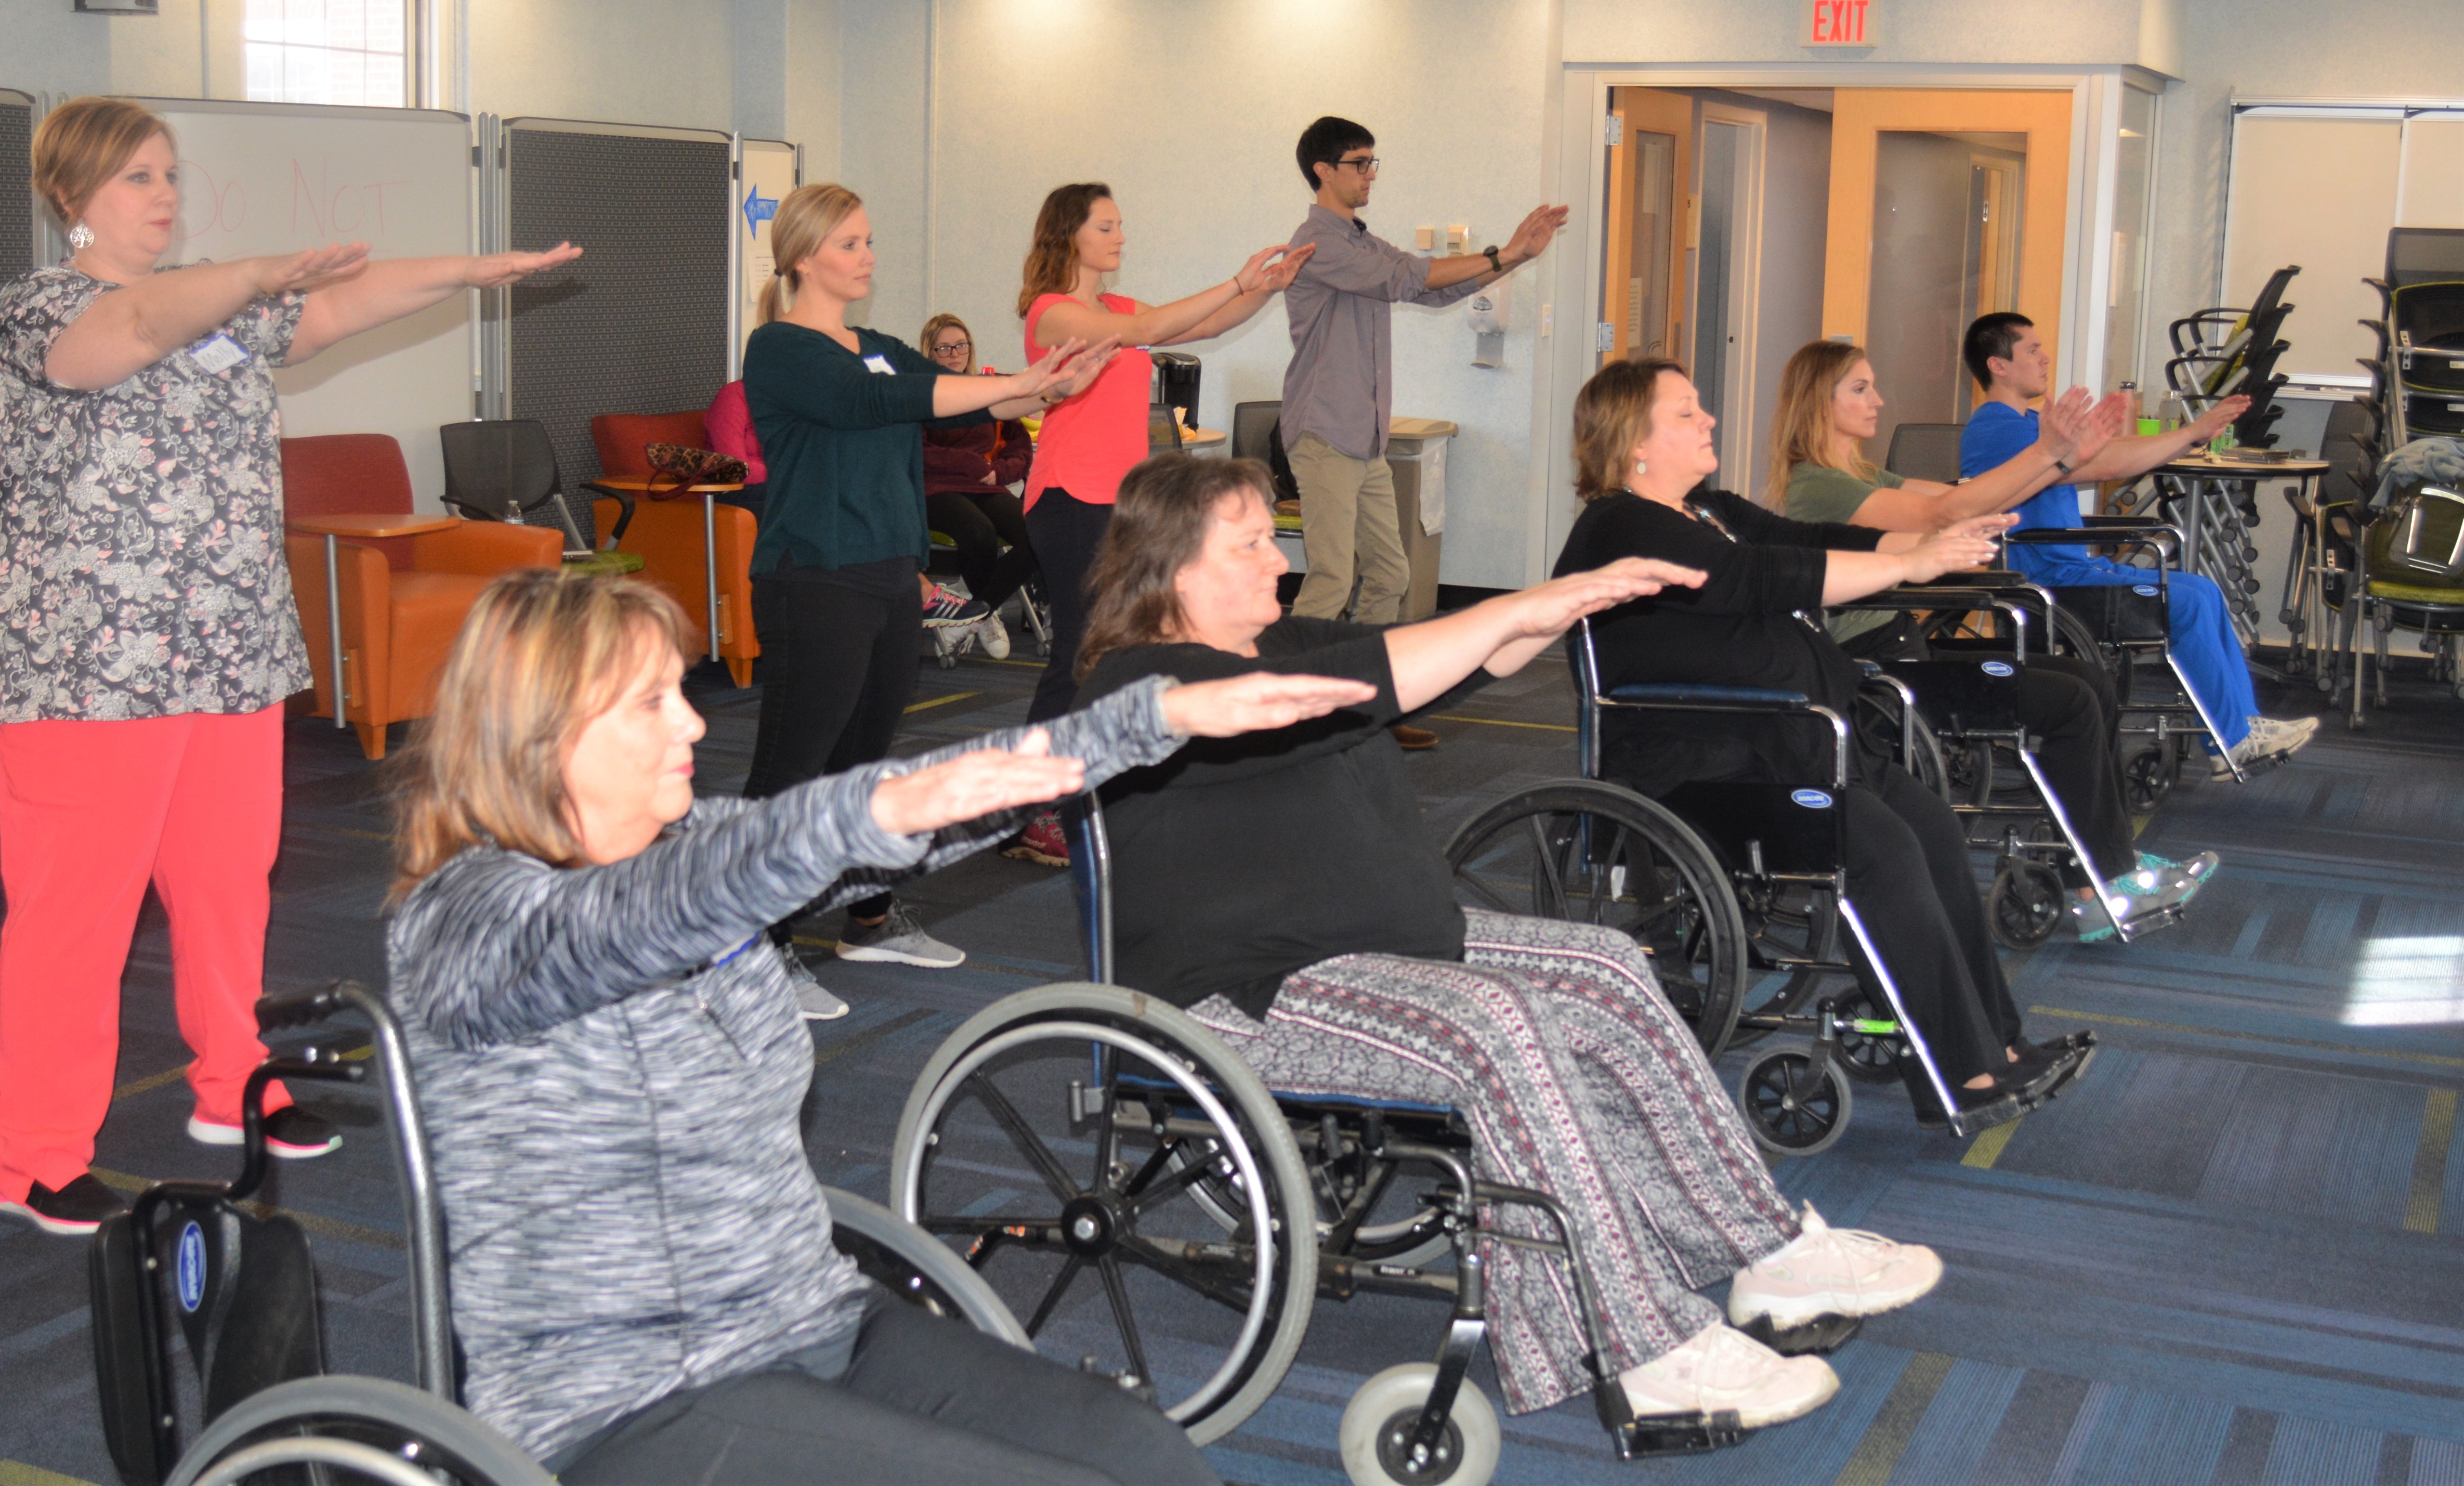 Ten people practice Tai Chi standing and sitting in wheelchairs